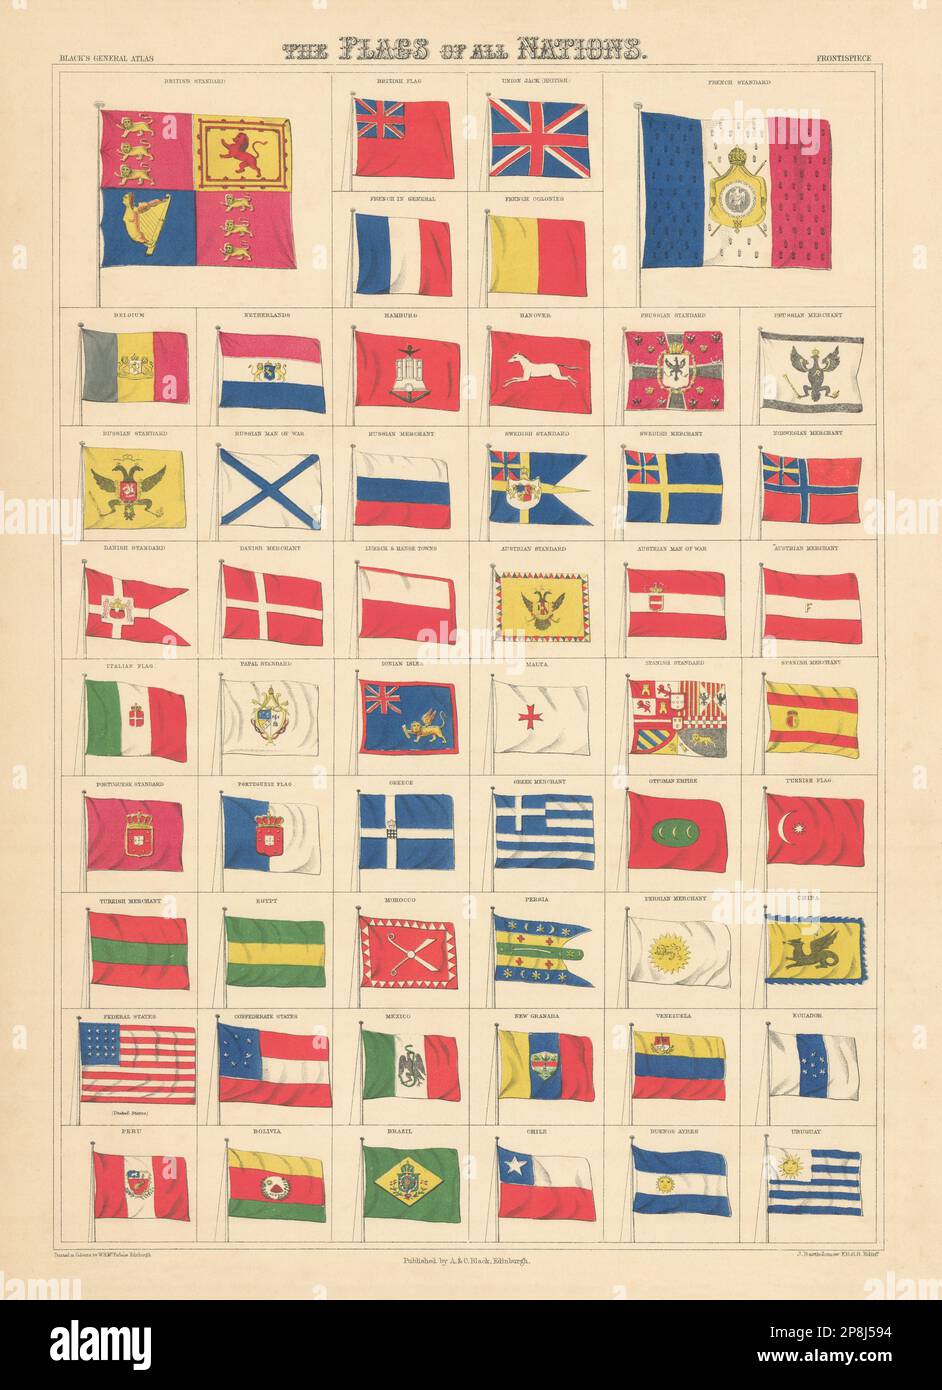 Flags of all Nations Standards merchants Ottoman Persia Lubeck China Brazil 1862 Stock Photo